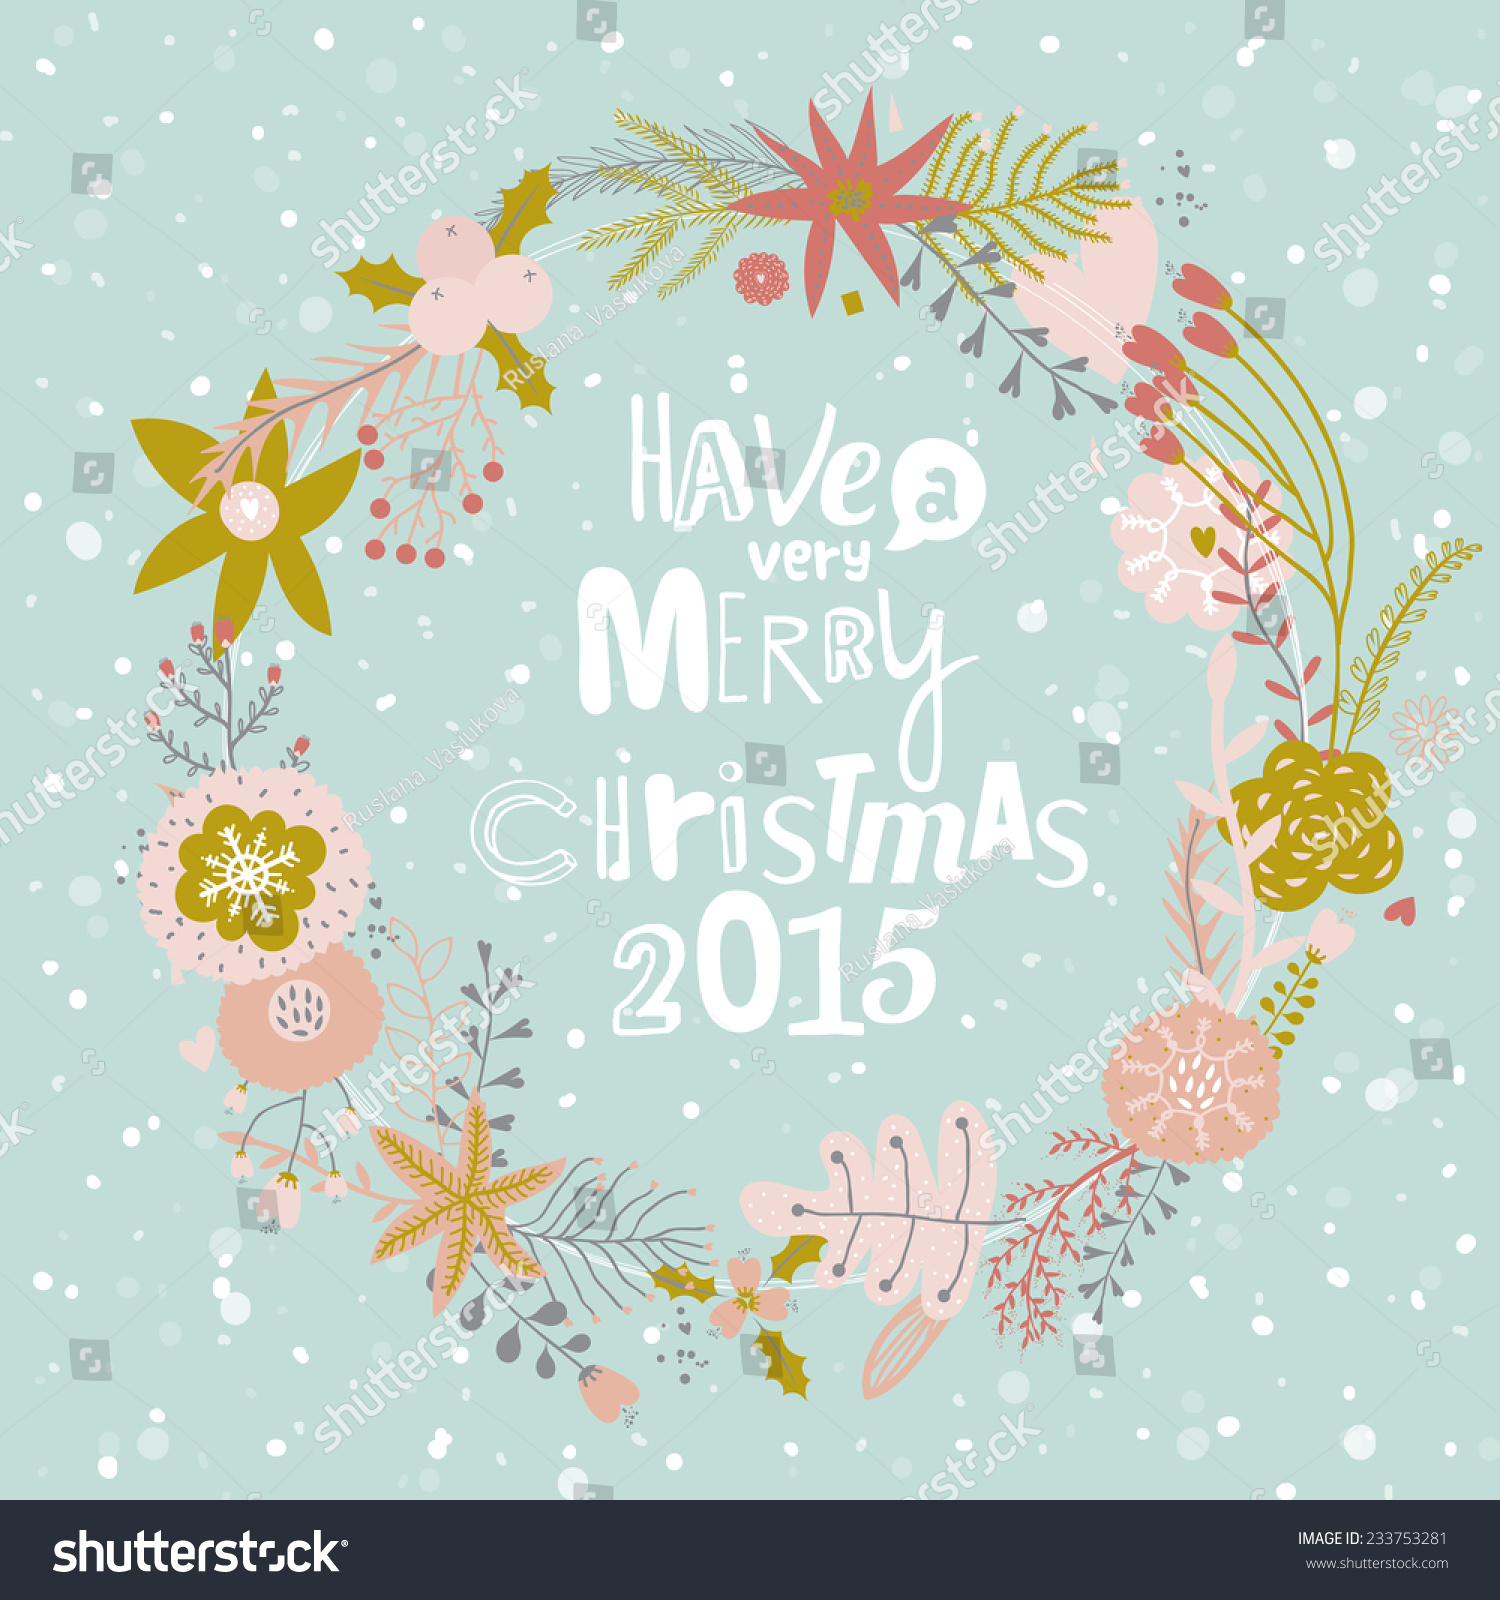 Vintage Merry Christmas And Happy New Year Calligraphic And Typographic Background Greeting stylish illustration of